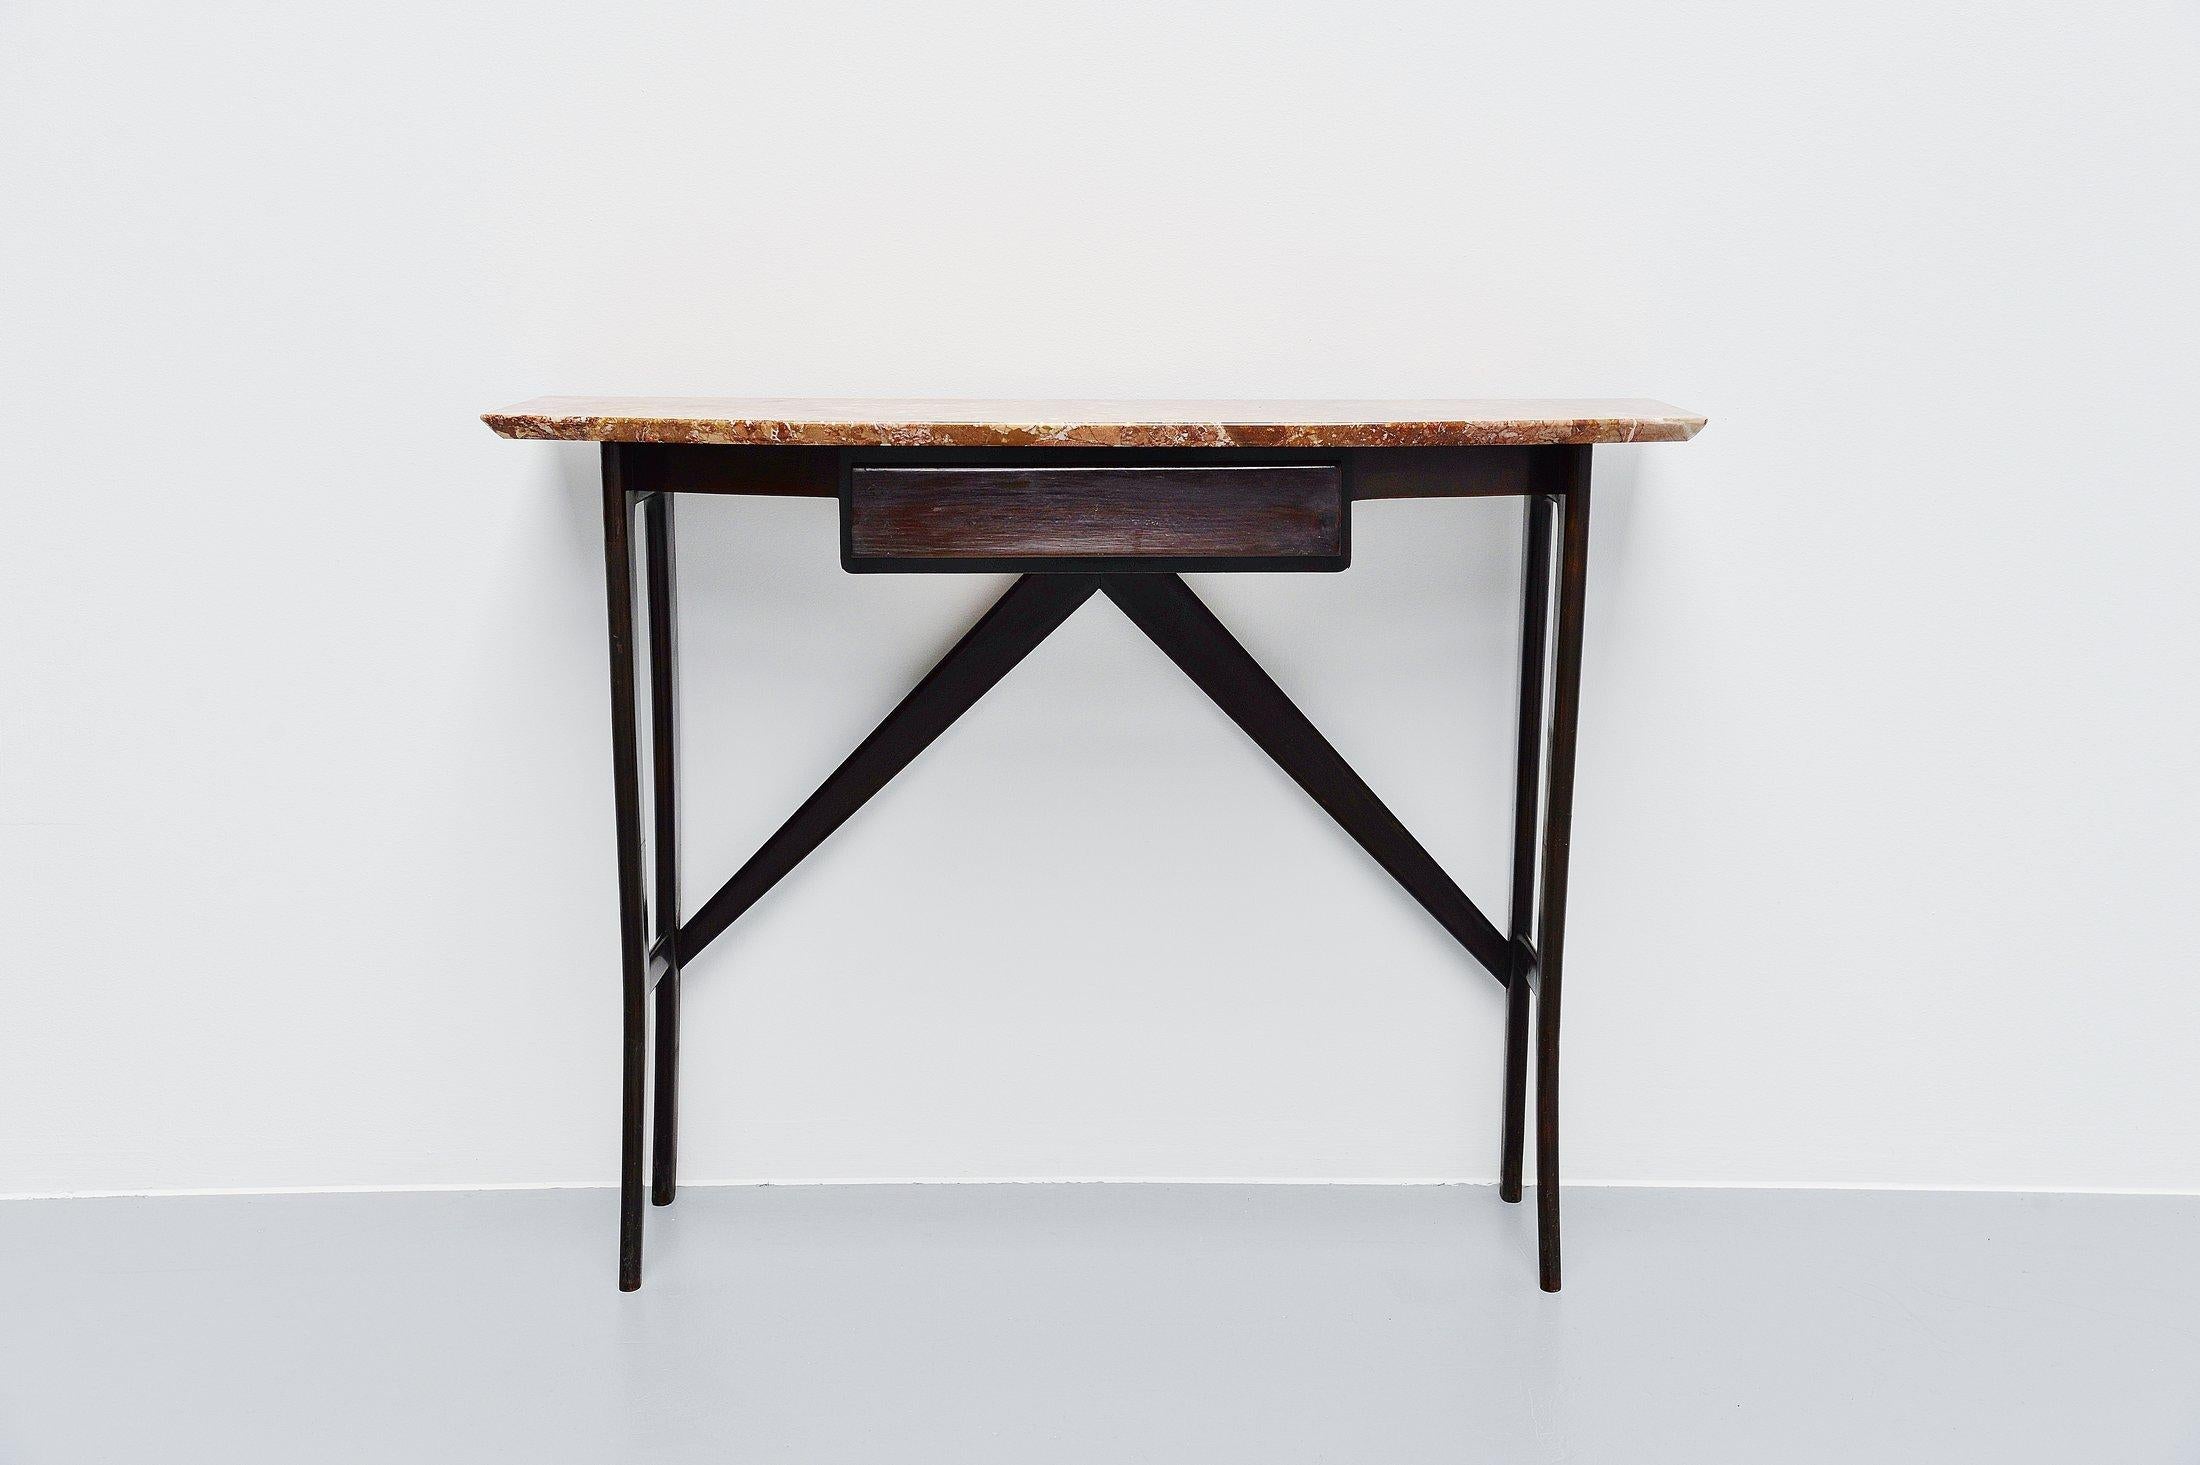 Fantastic shaped Italian console table made by unknown designer and manufacturer but in the style of Ico Parisi, Italy, 1950. This is for a gloss dark brown ebonized beech wooden console with pink/orange marble top. This fantastic shaped console